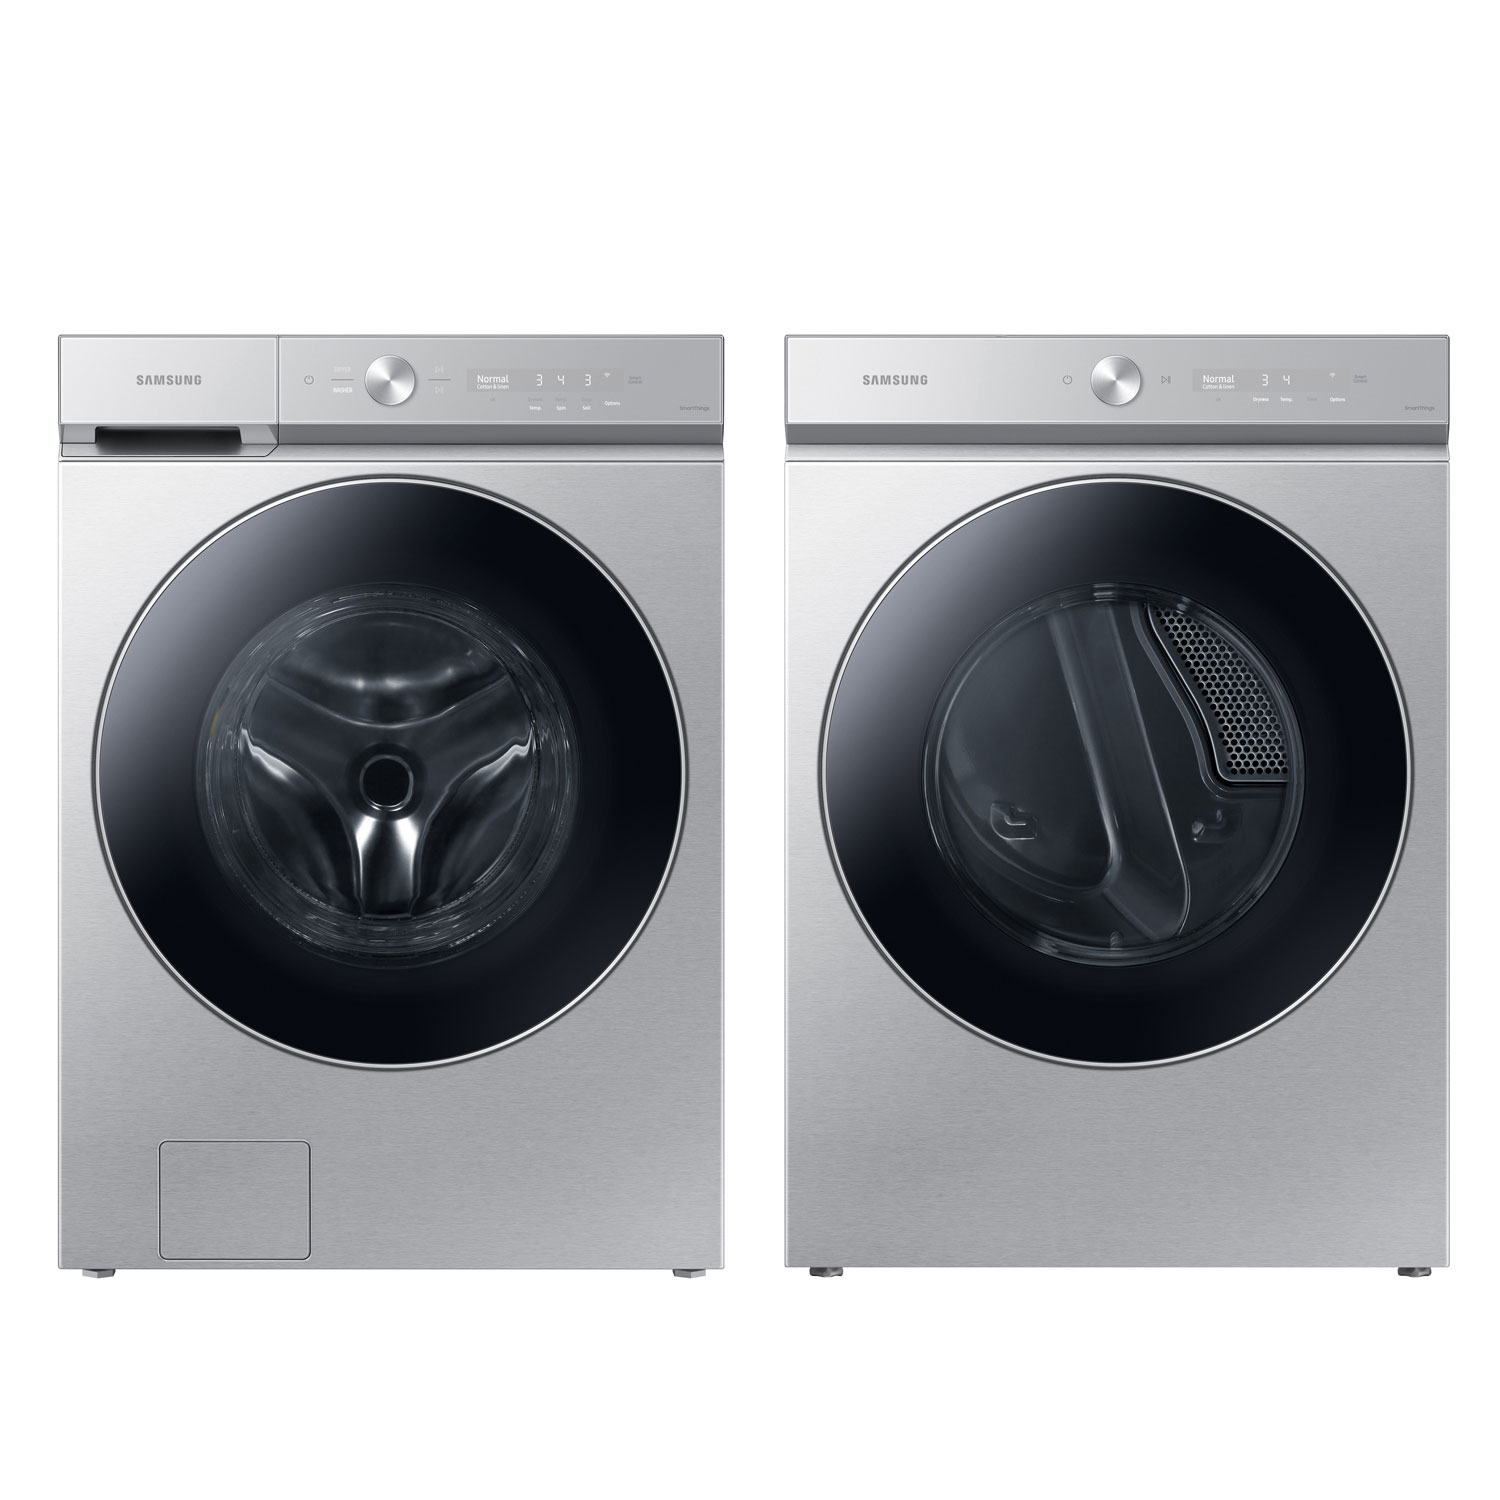 Samsung Bespoke 6.1 Cu. Ft. HE Front Load Steam Washer & 7.6 Cu. Ft. Electric Steam Dryer - Silver Steel